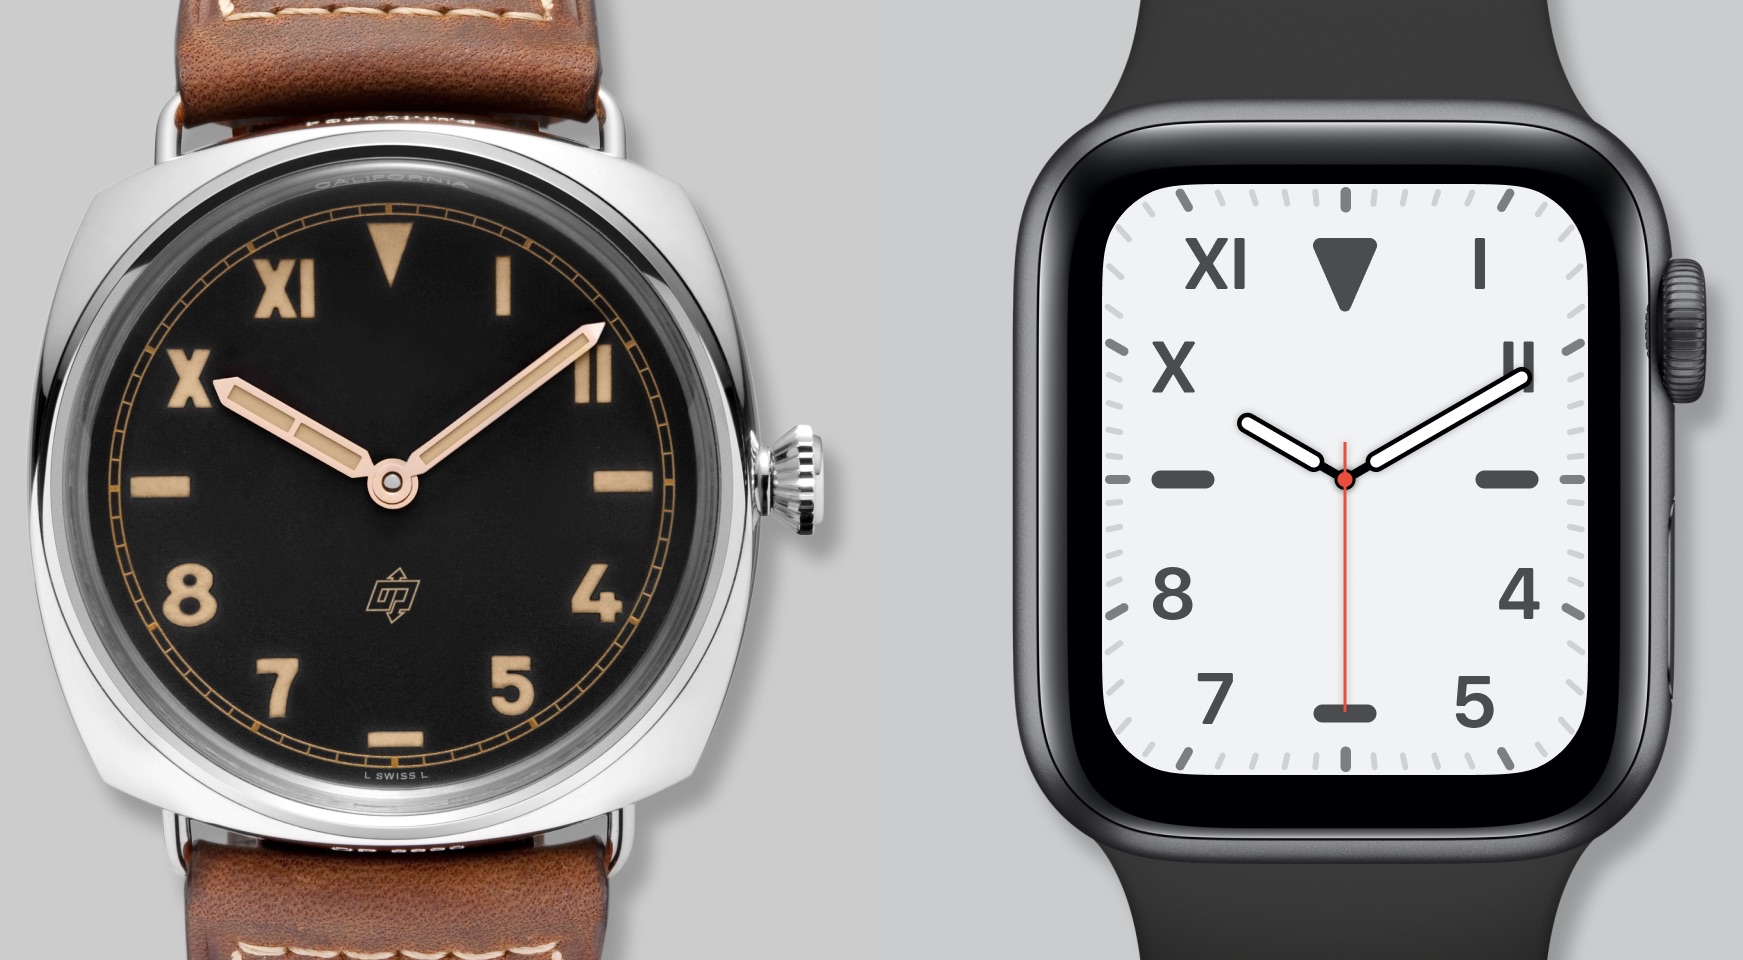 Designer Shares Deep Dive Into History of Classic Apple Watch Faces